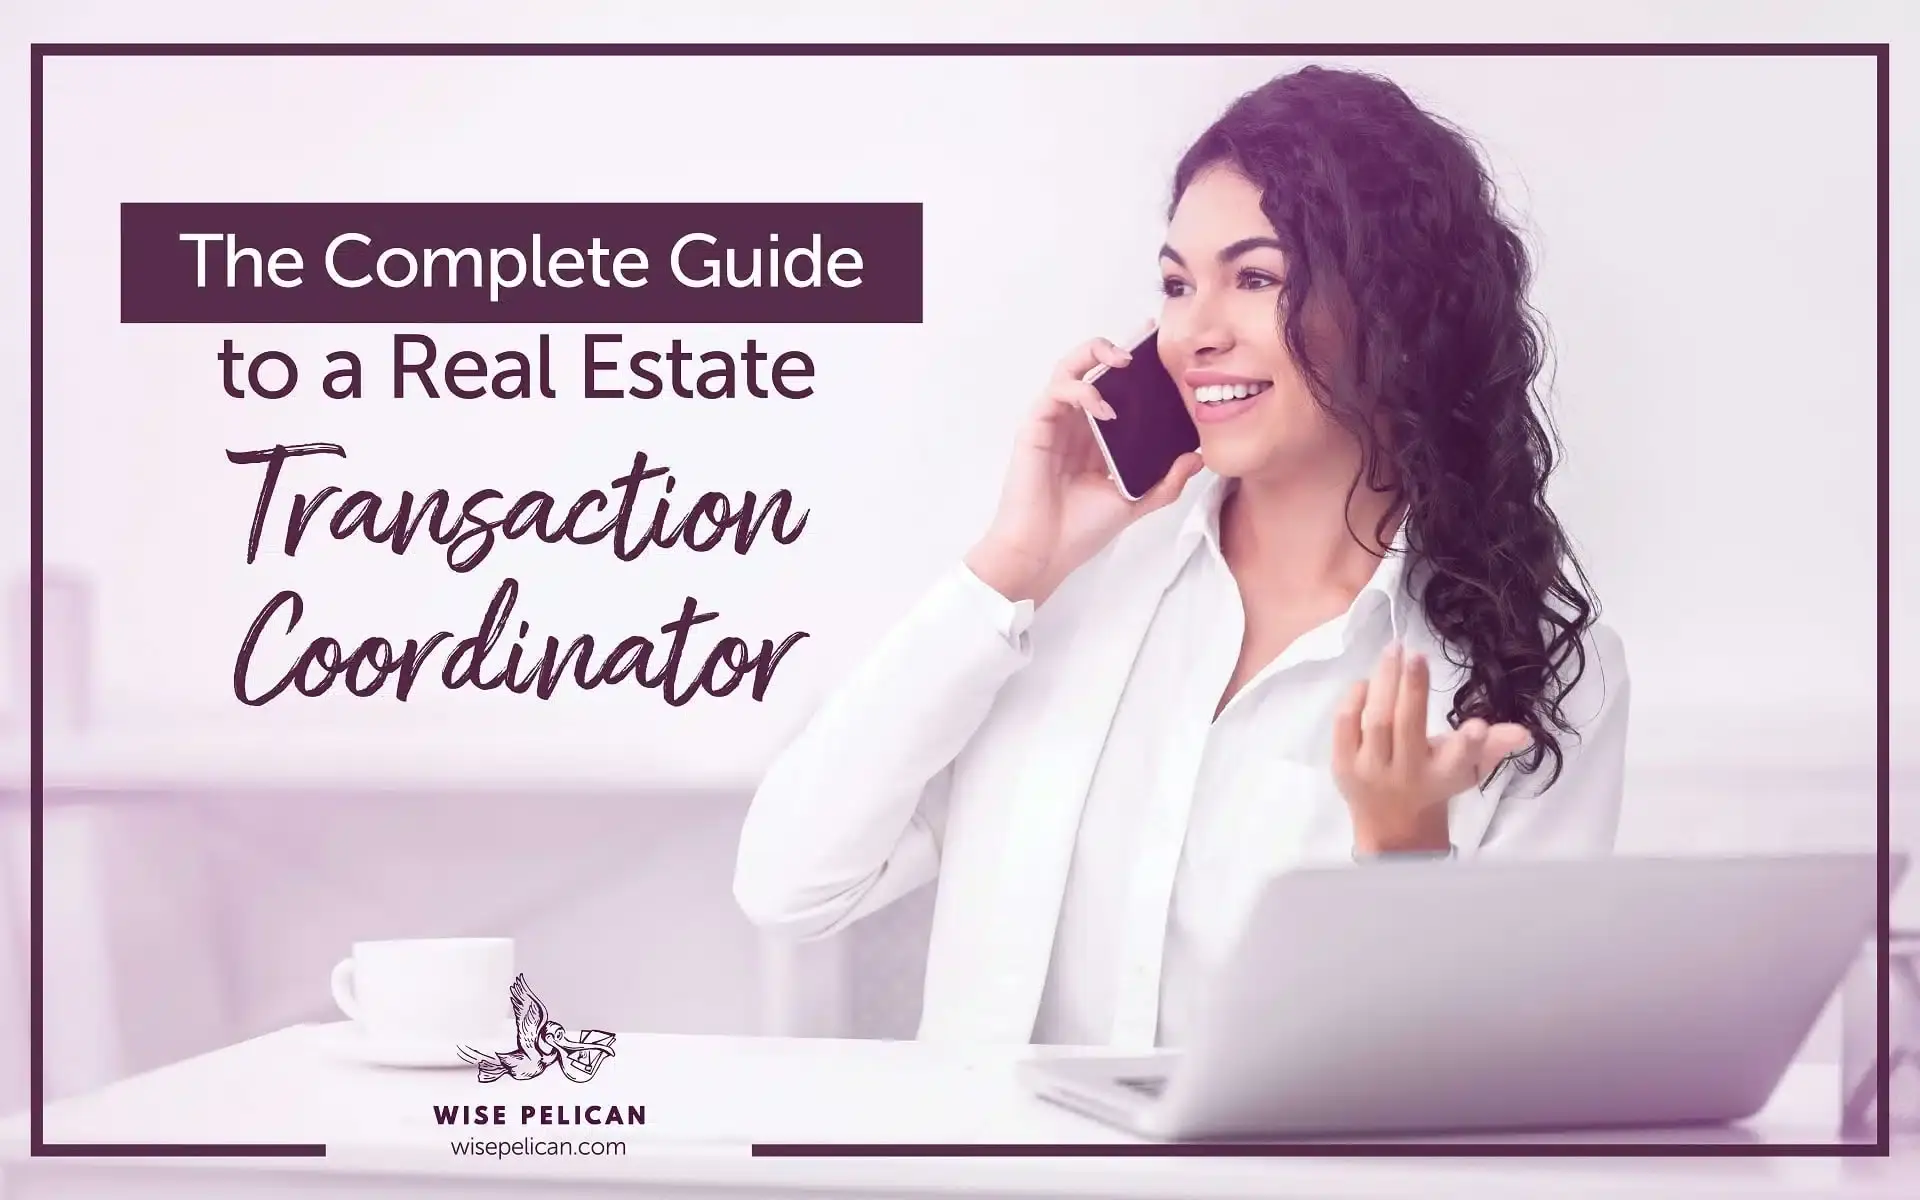 What is a transaction coordinator in real estate?